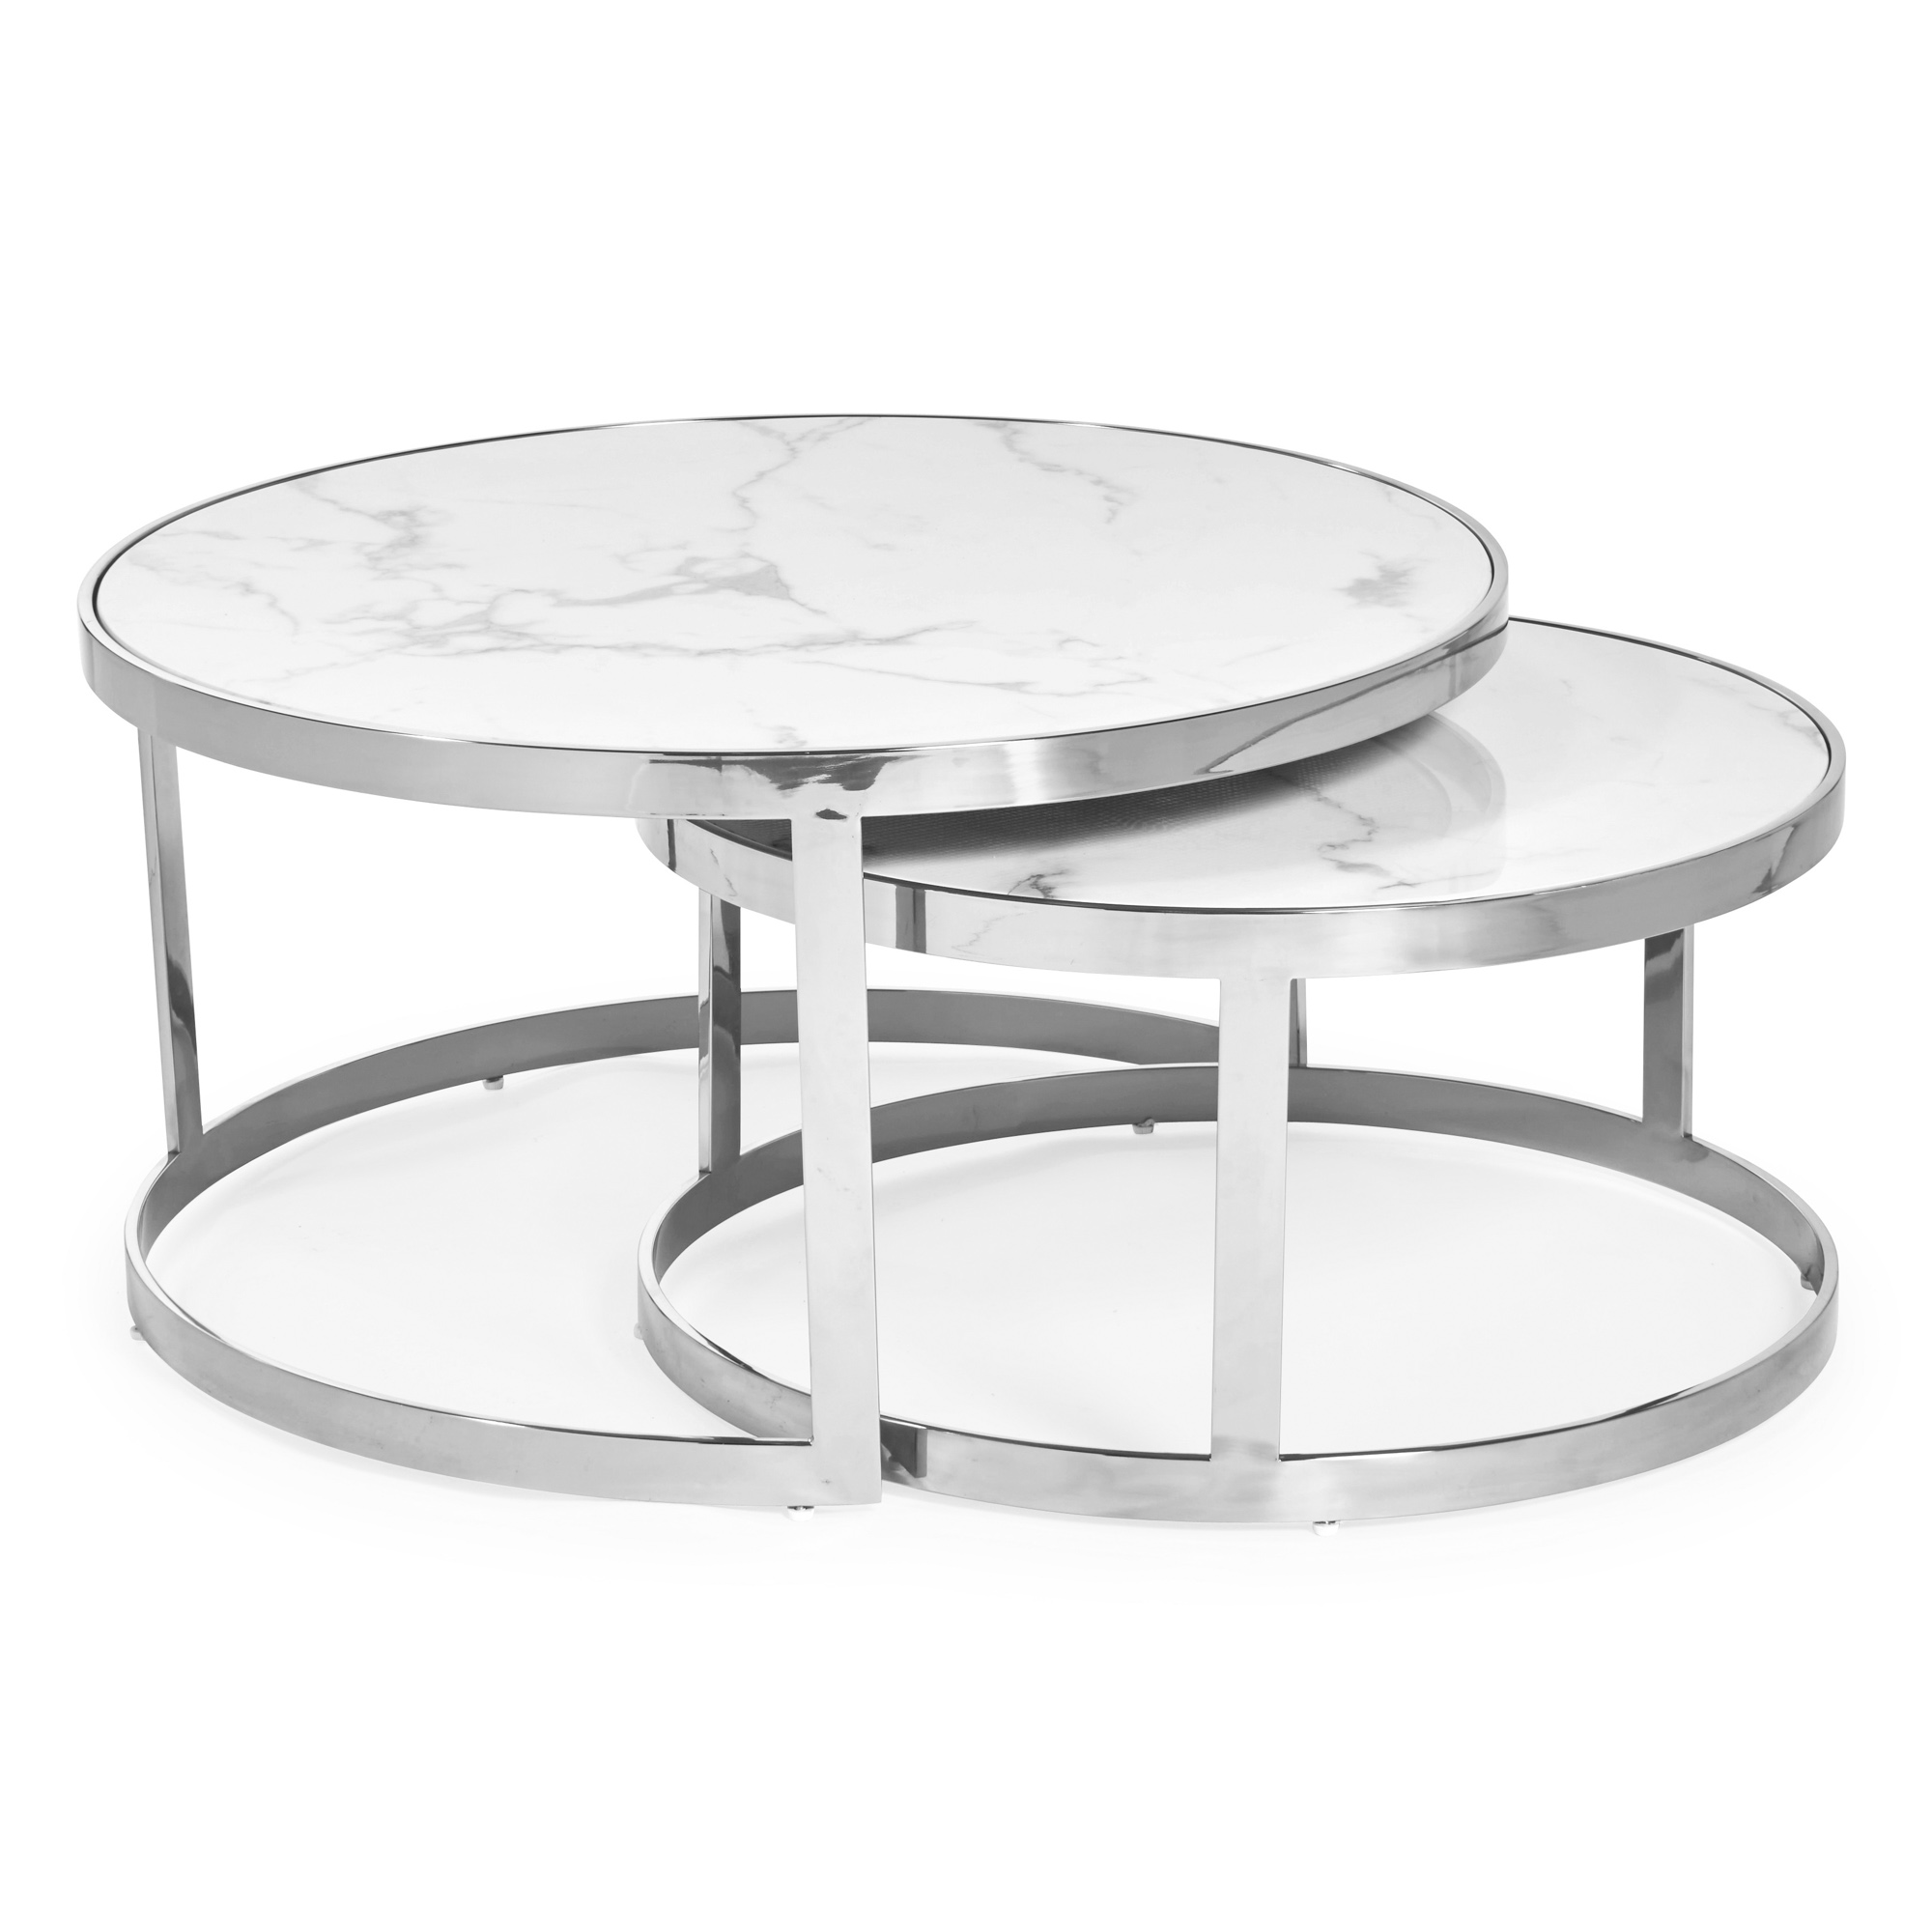 Florence Stainless Steel Framed Set of 2 Circular Coffee Nest Tables – White Marble